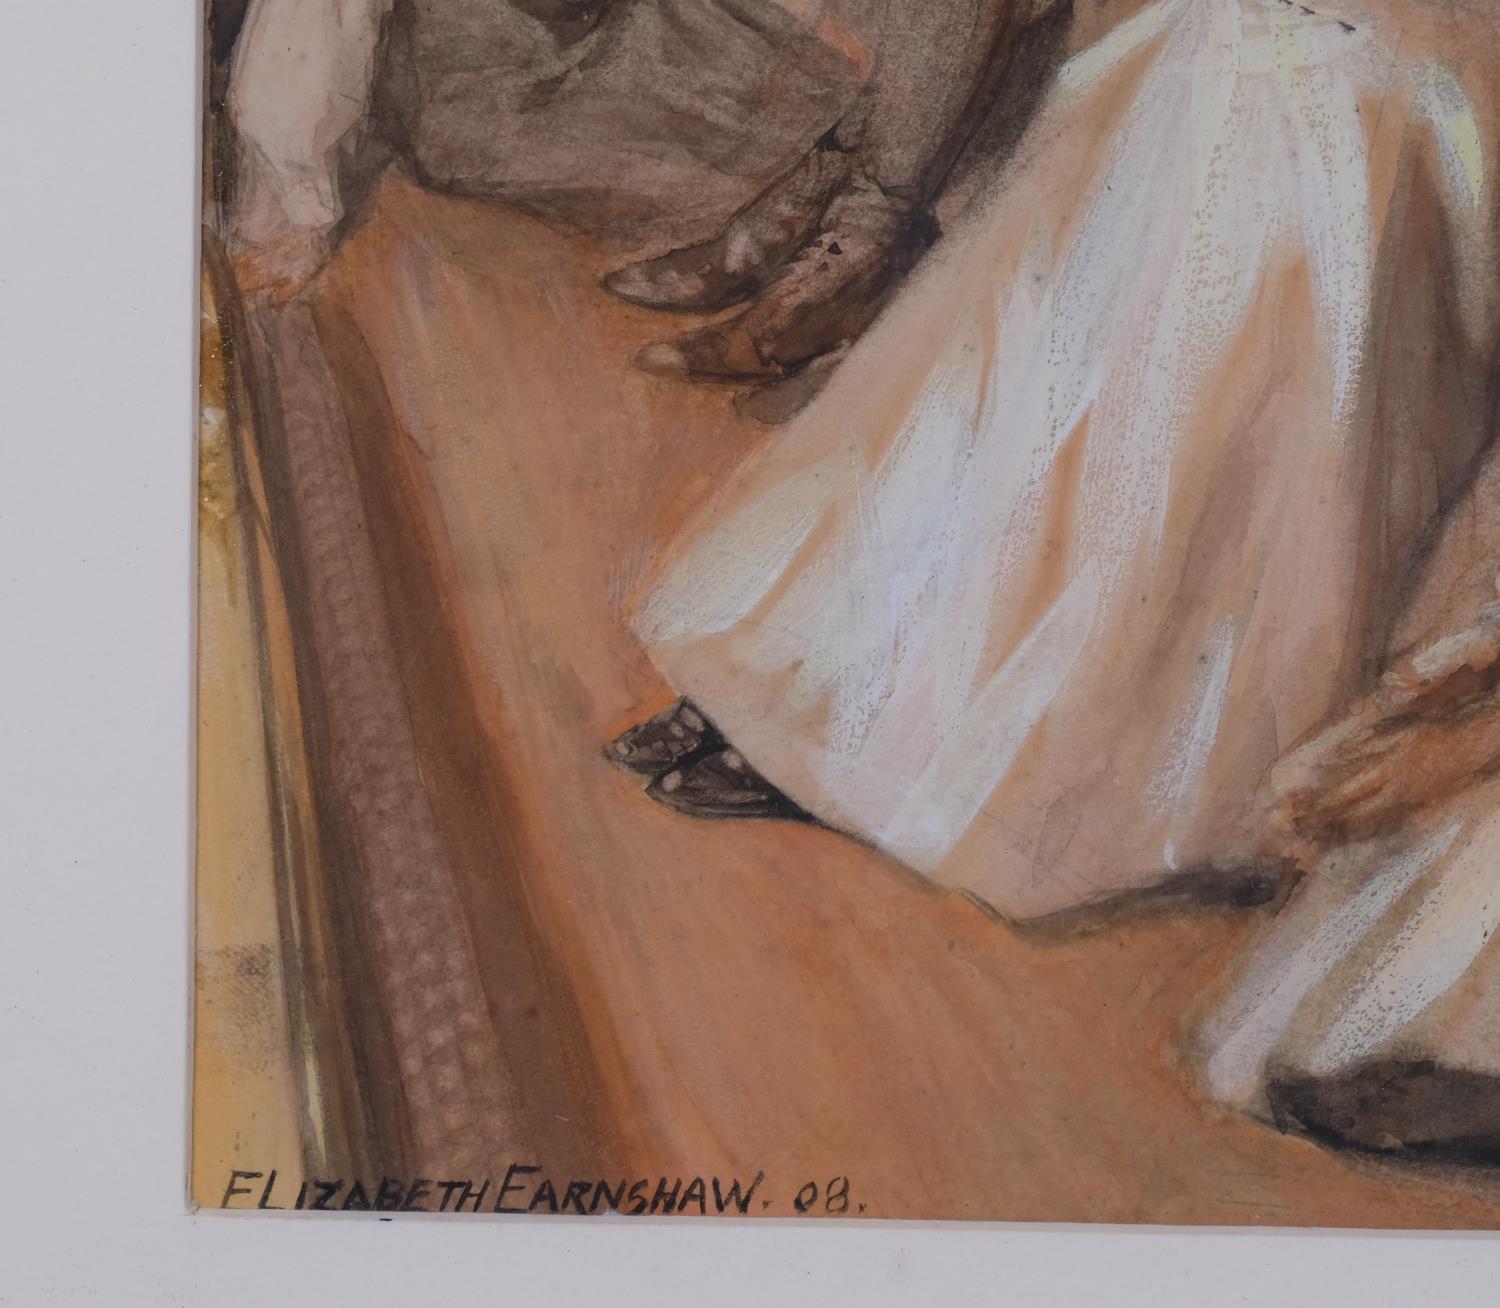 Elizabeth Earnshaw, firelight, watercolour, signed and dated 1908, exhibited at the Royal Academy - Image 3 of 4